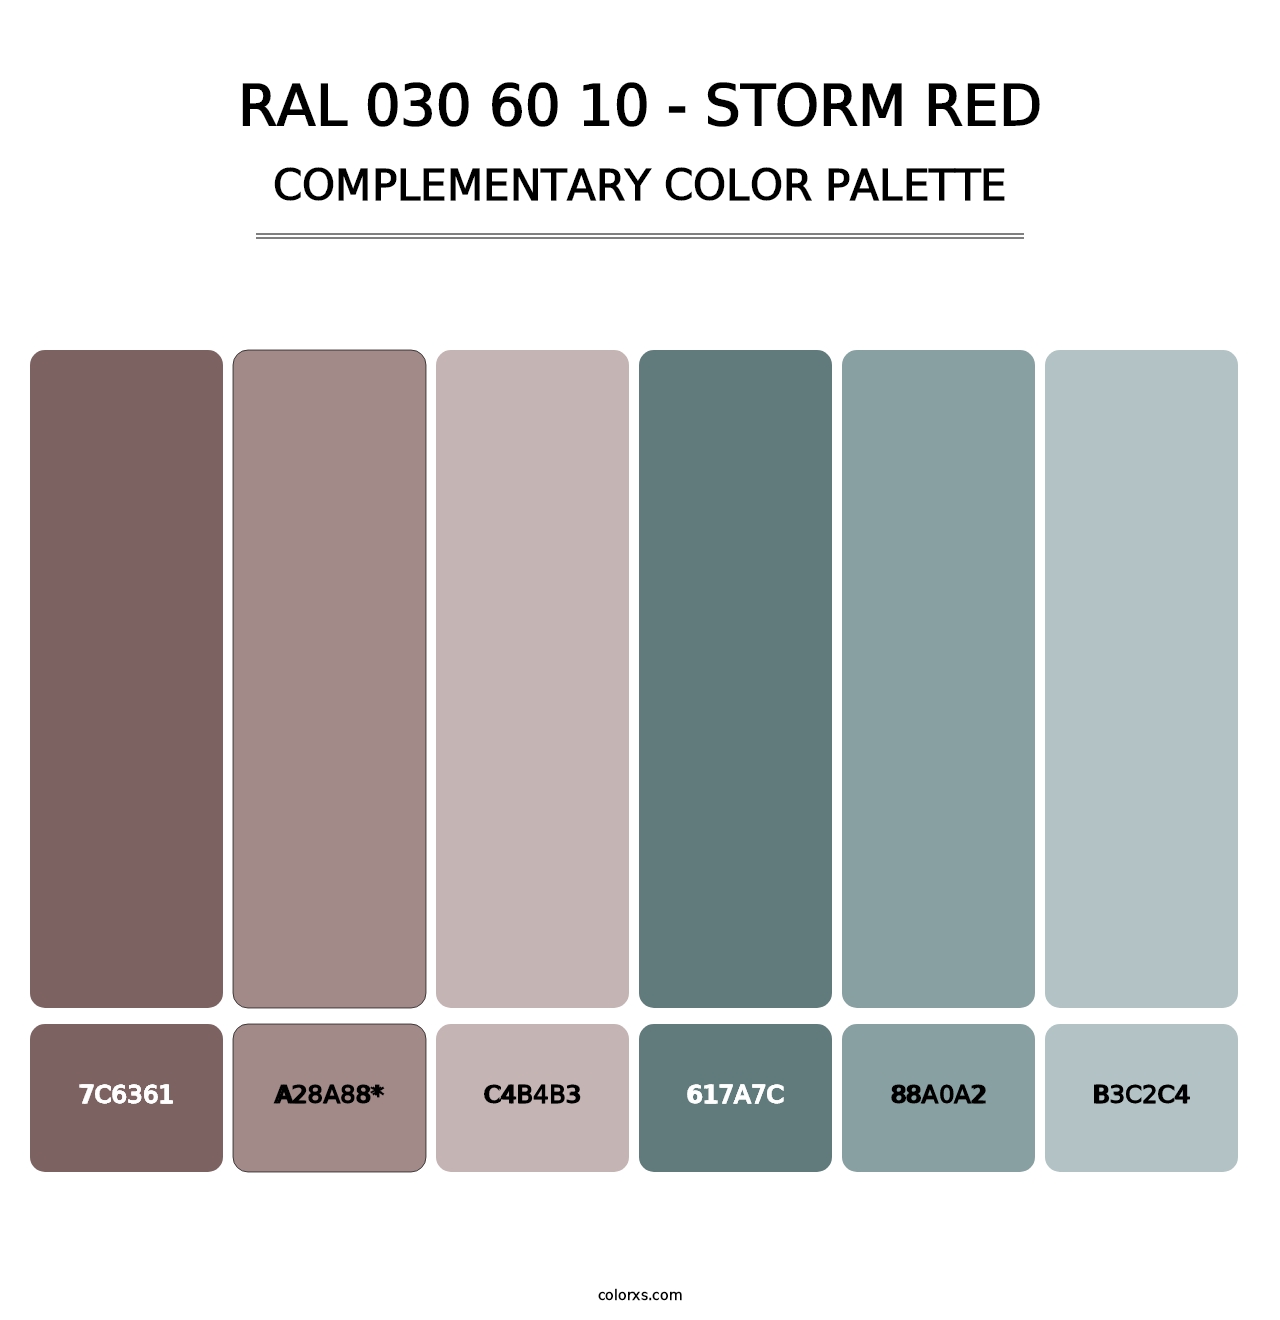 RAL 030 60 10 - Storm Red - Complementary Color Palette